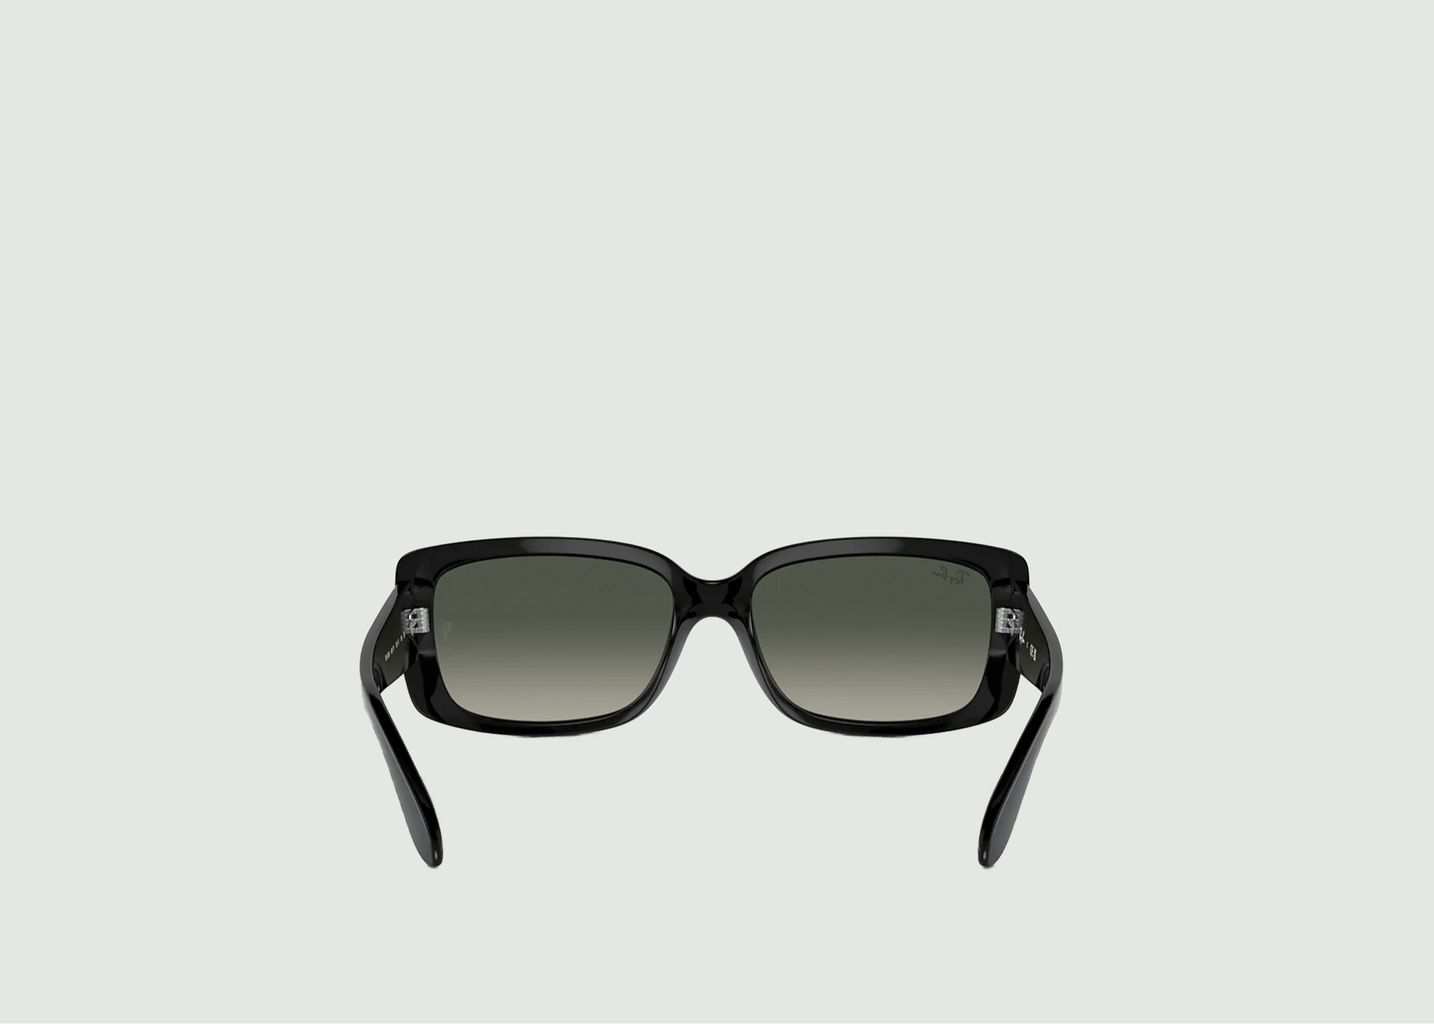 Sonnenbrille 0RB4389 - Ray-Ban